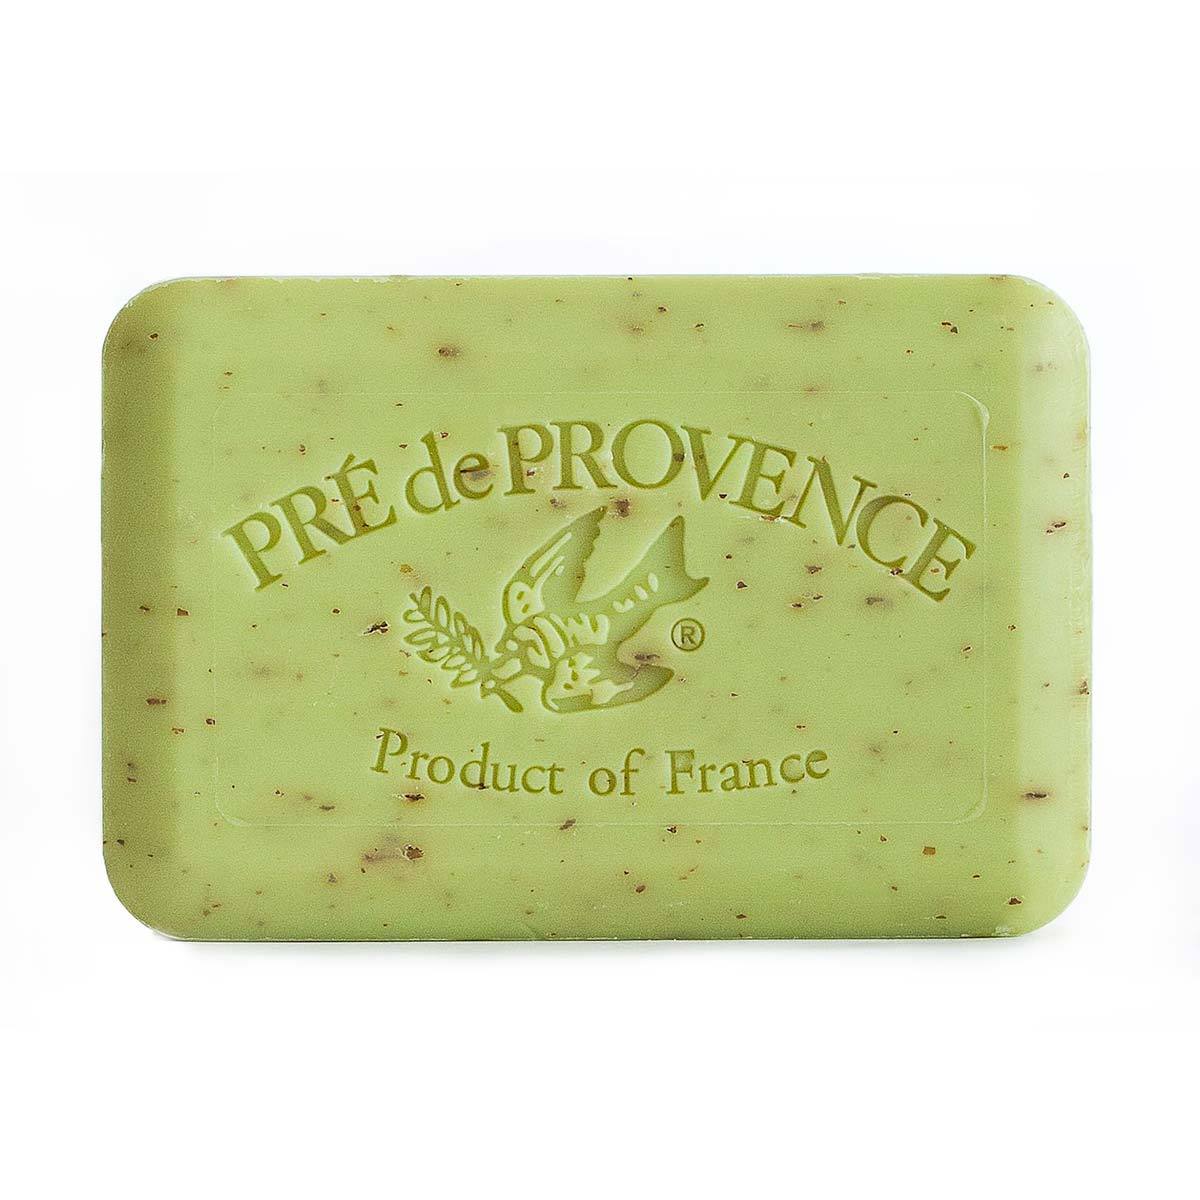 Primary image of Lime Zest Soap